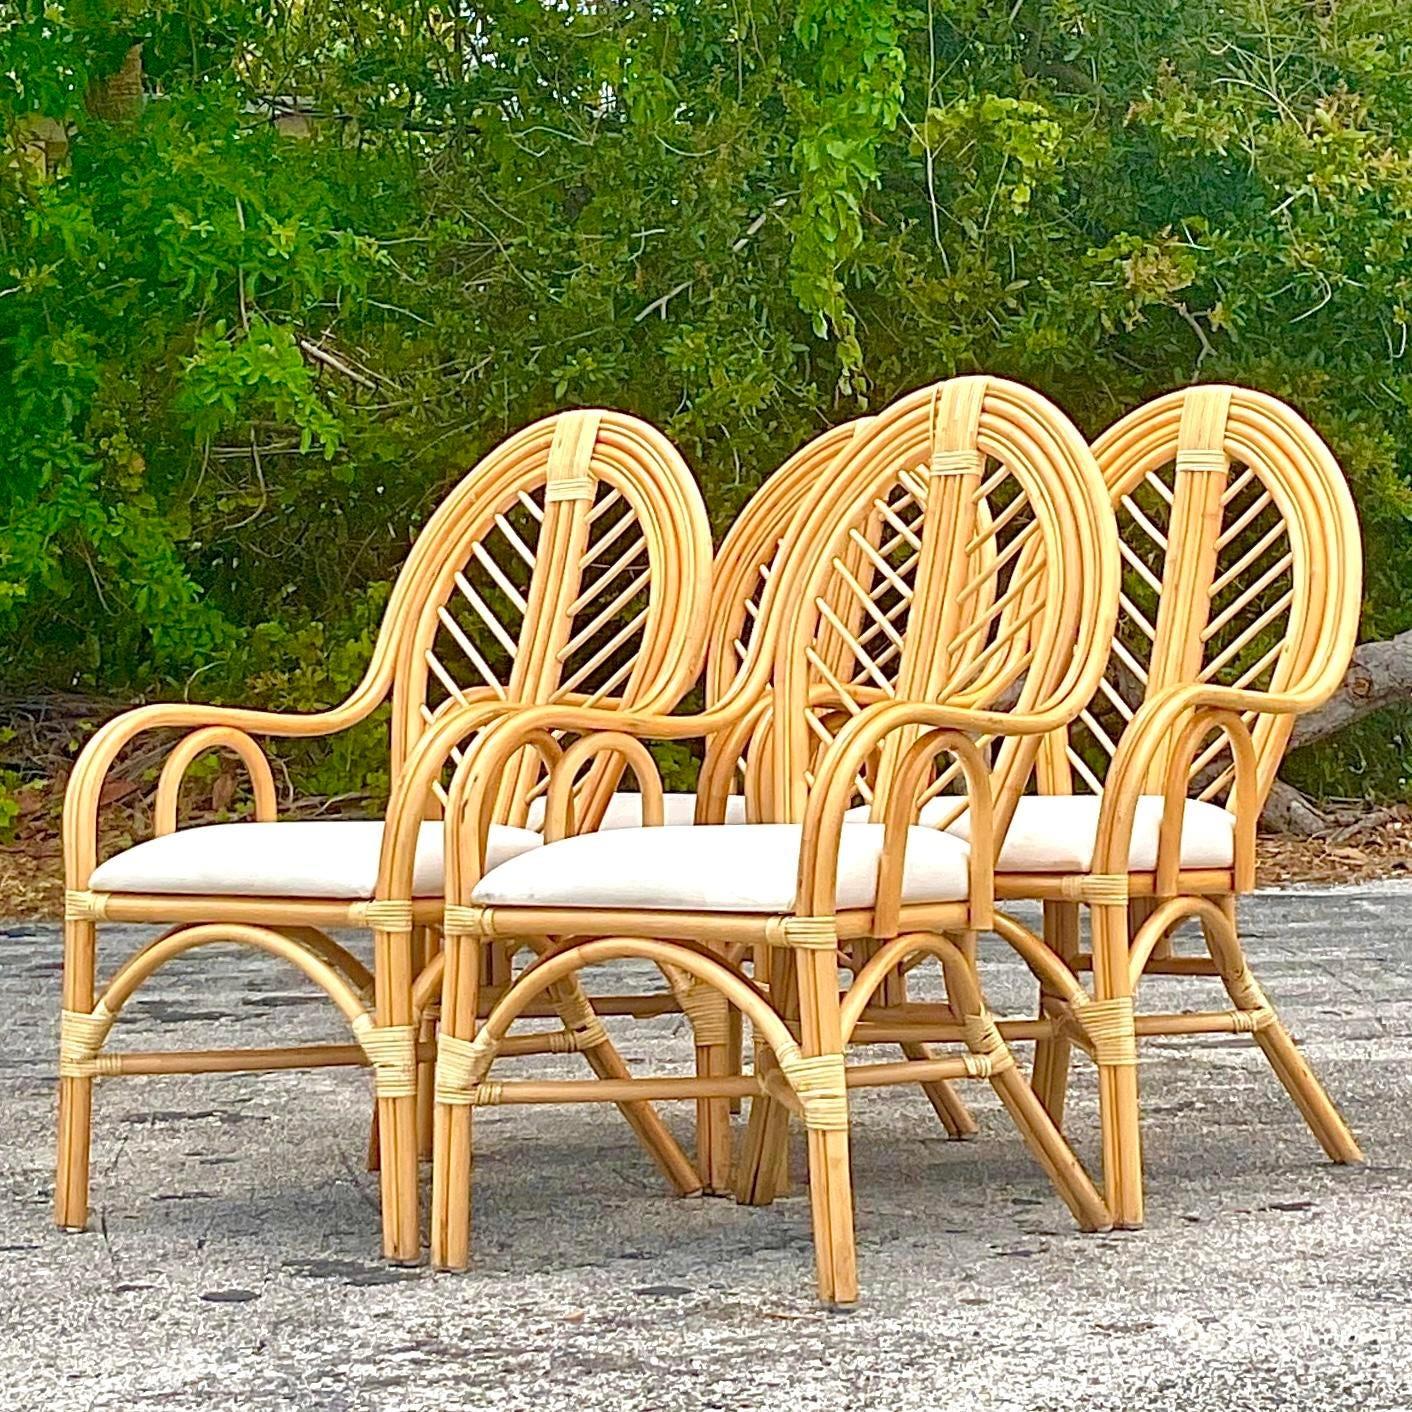 20th Century Vintage Coastal Bent Rattan Dining Chairs - Set of 4 For Sale